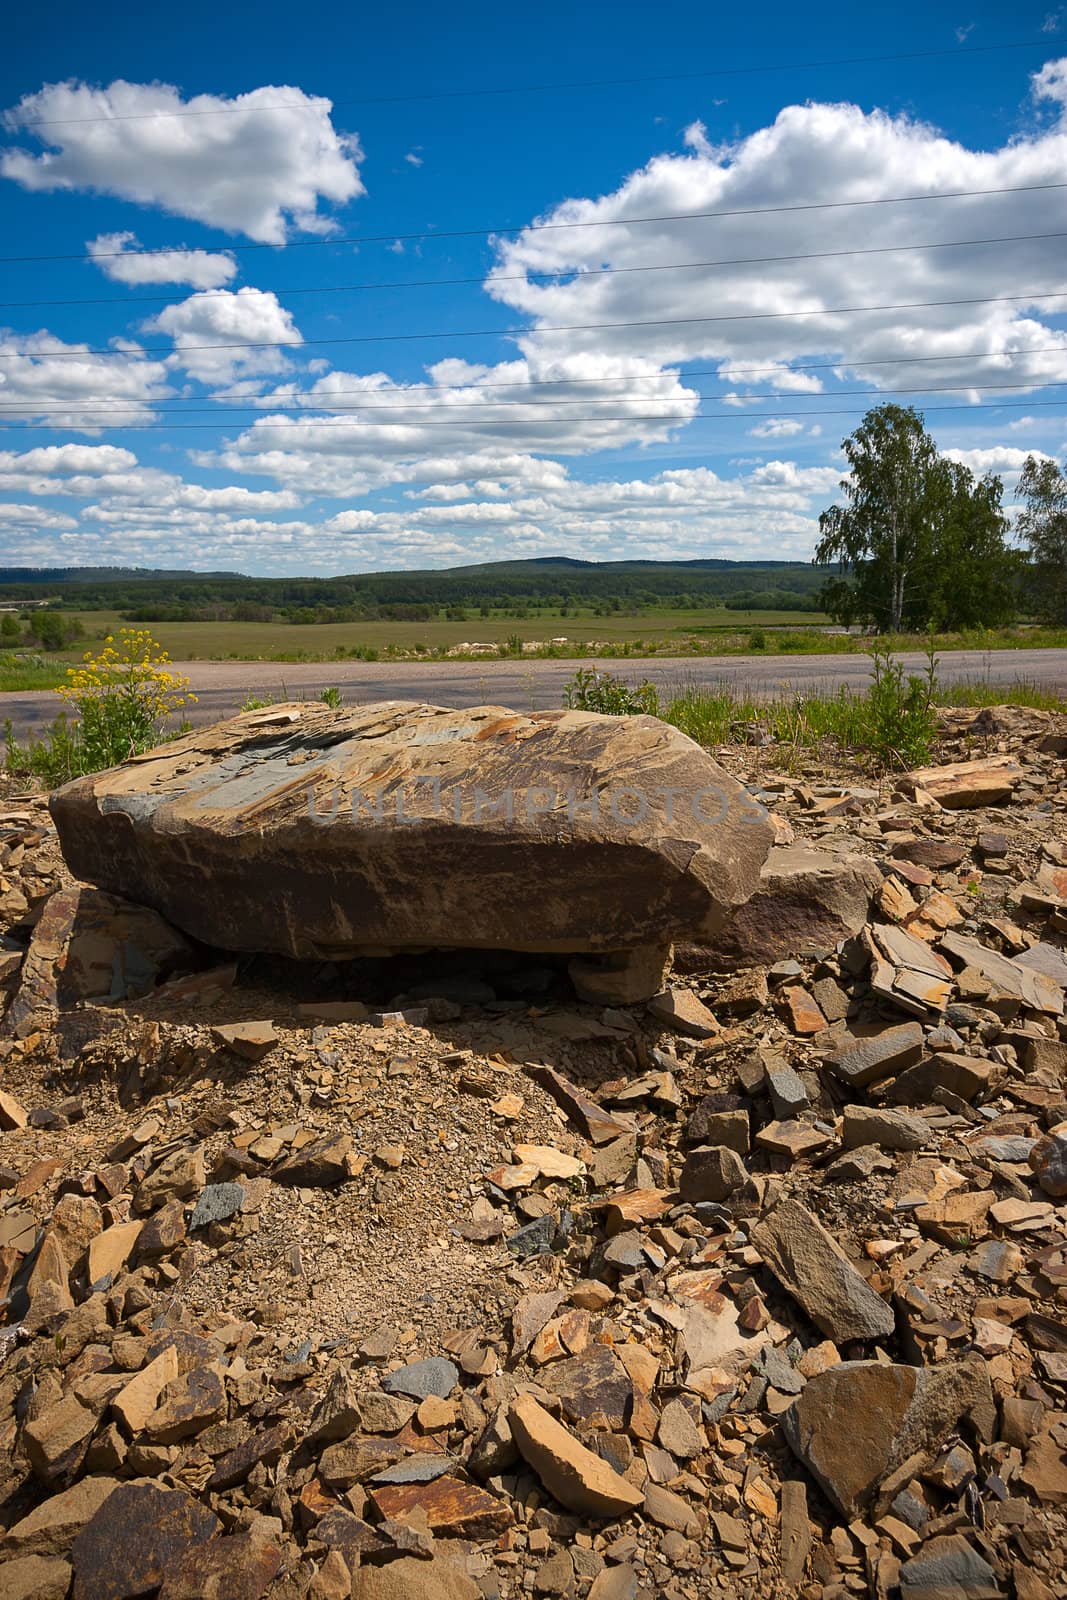 Stones on  road against  blue sky, Russia. Beautiful landscape.